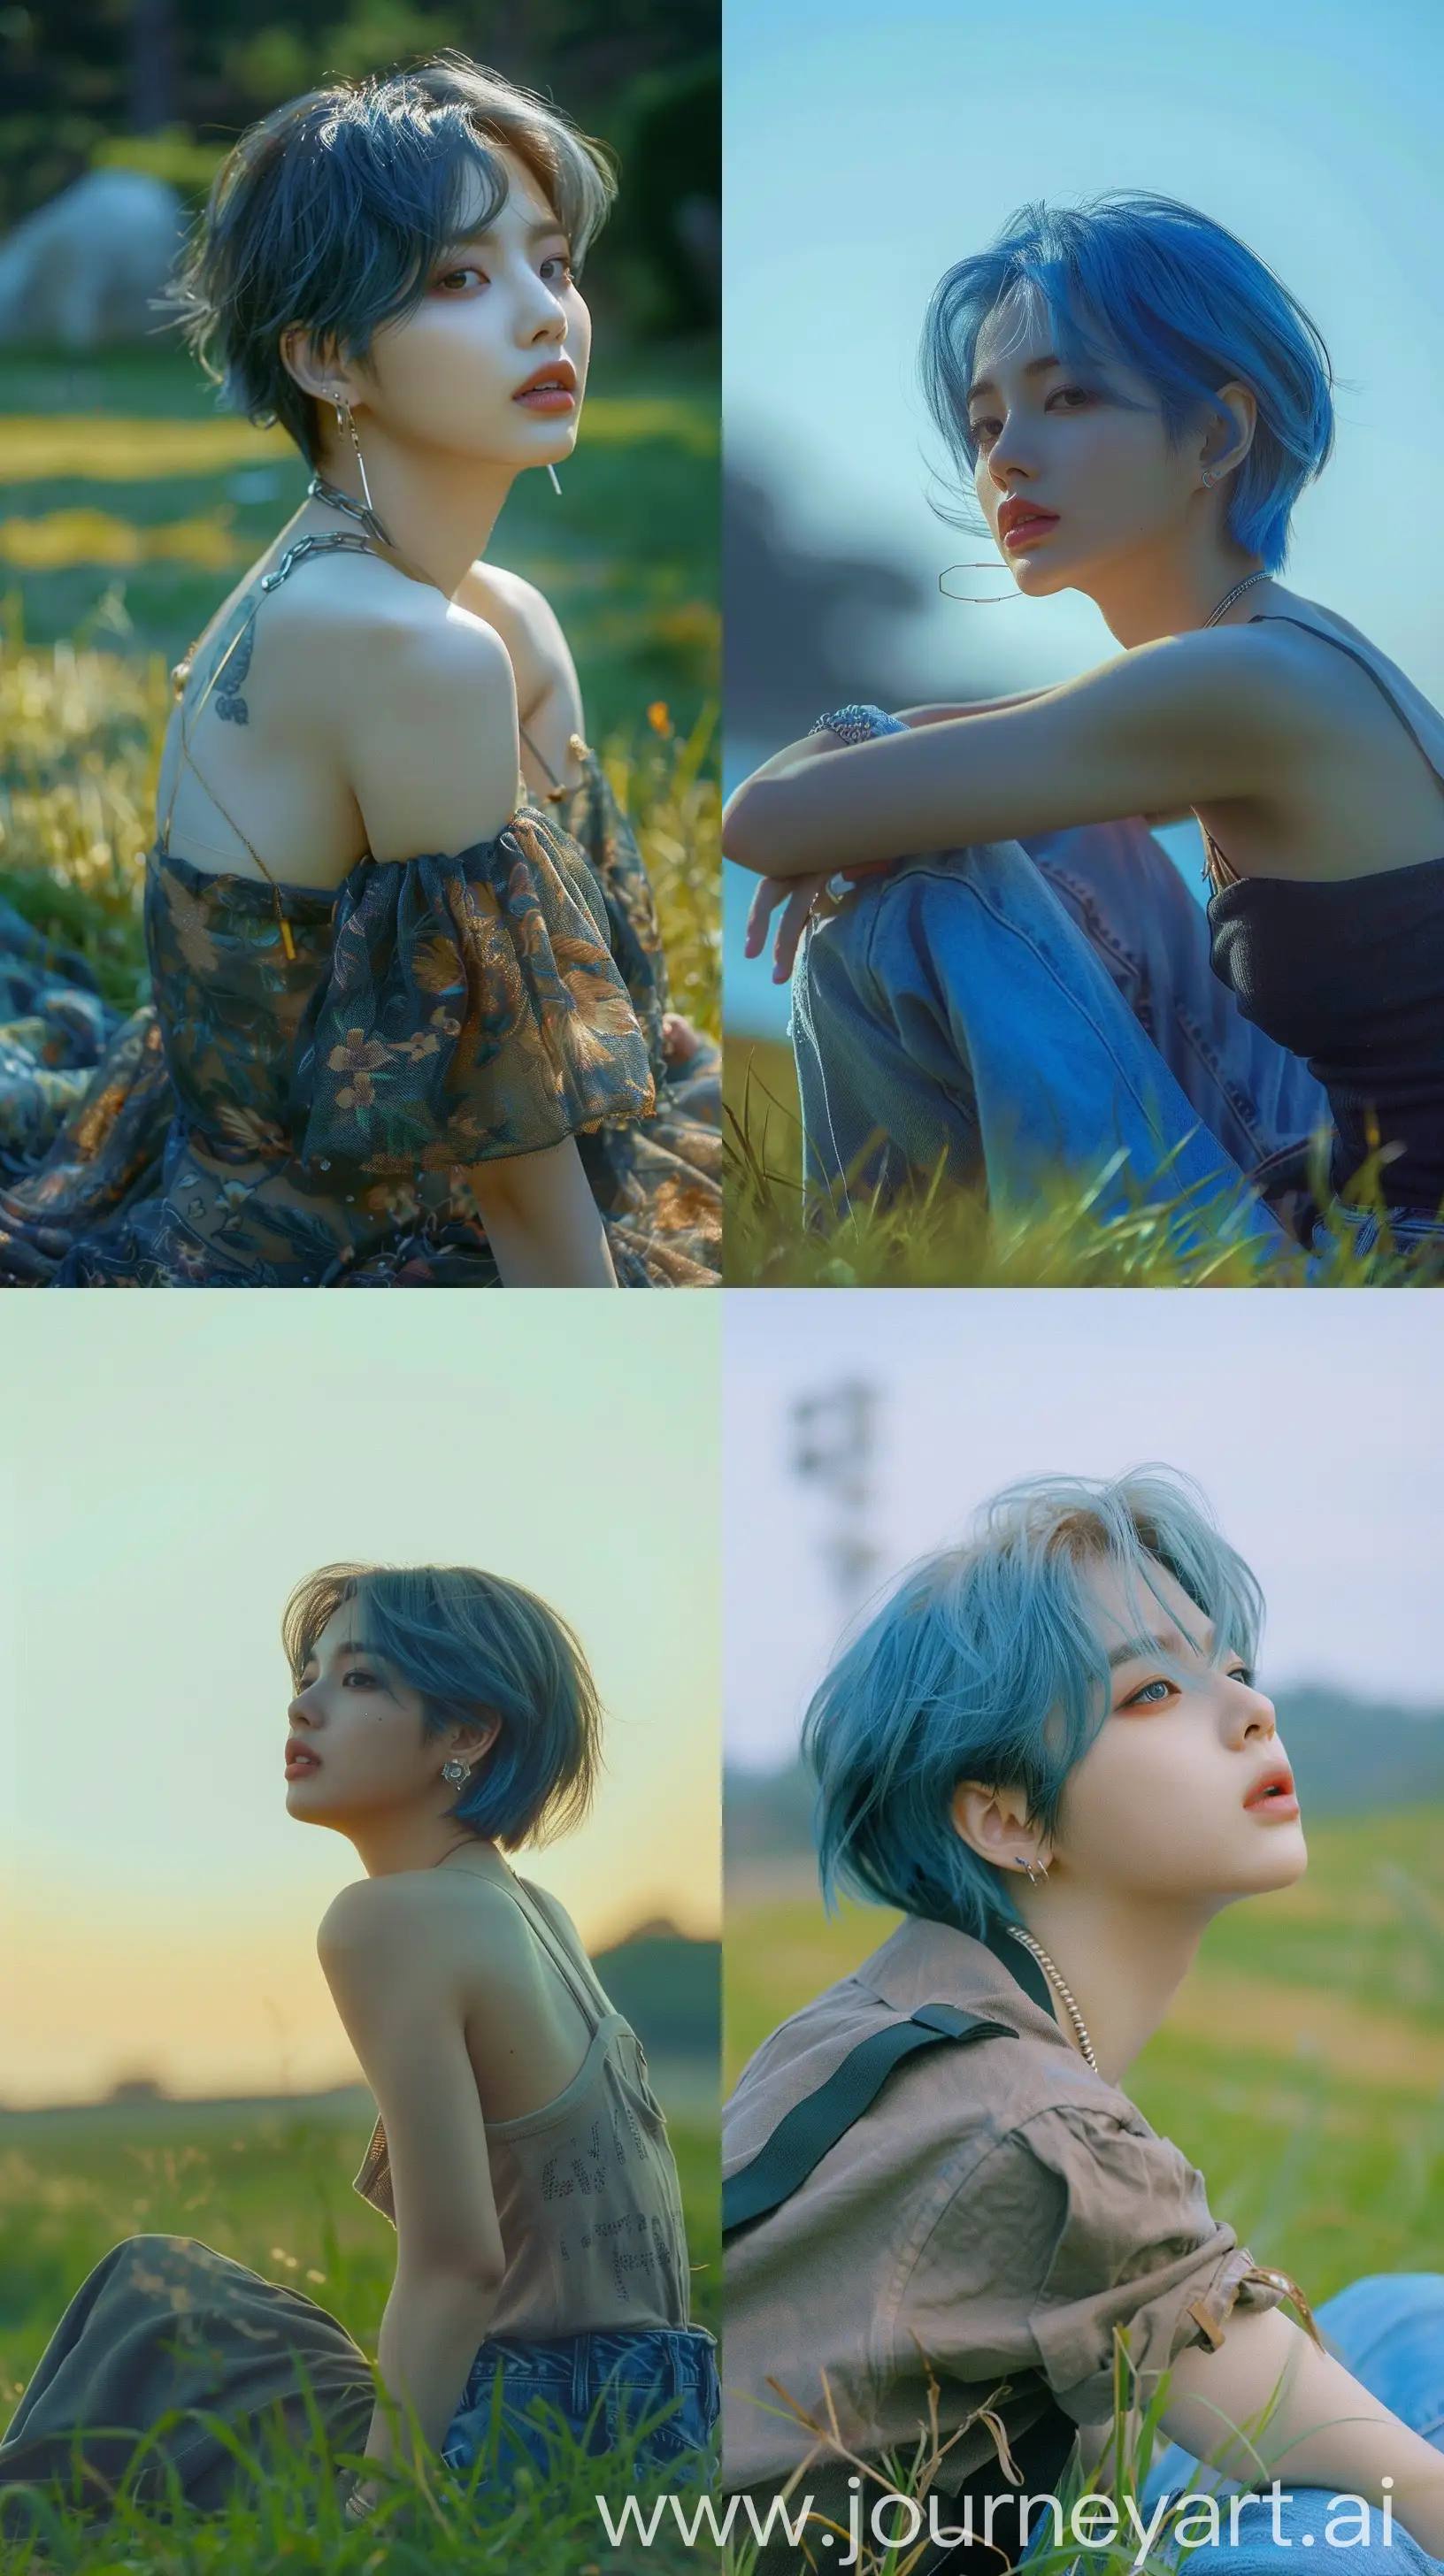 Stylish-Instagram-Profile-Picture-of-Blackpinks-Jennie-with-Blue-Short-Hair-Sitting-on-Grass